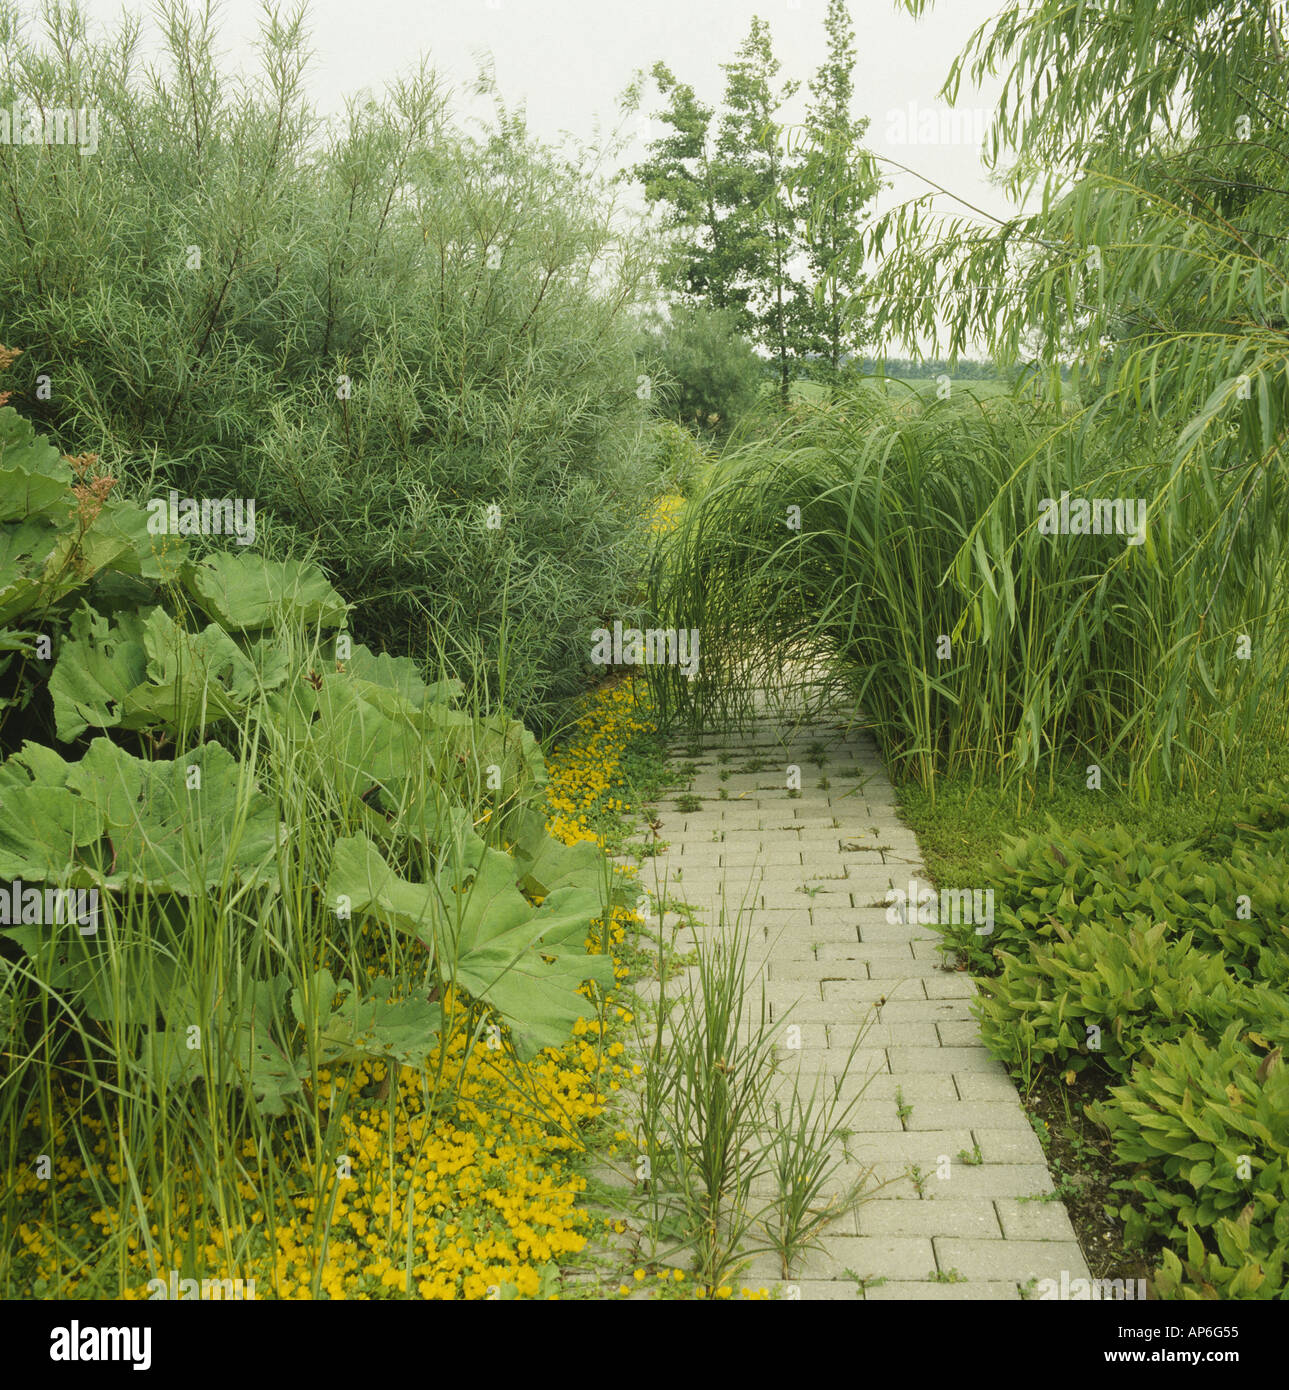 Pale brick path between lush beds of waterloving plants including willows and ormamental rhubarb Stock Photo